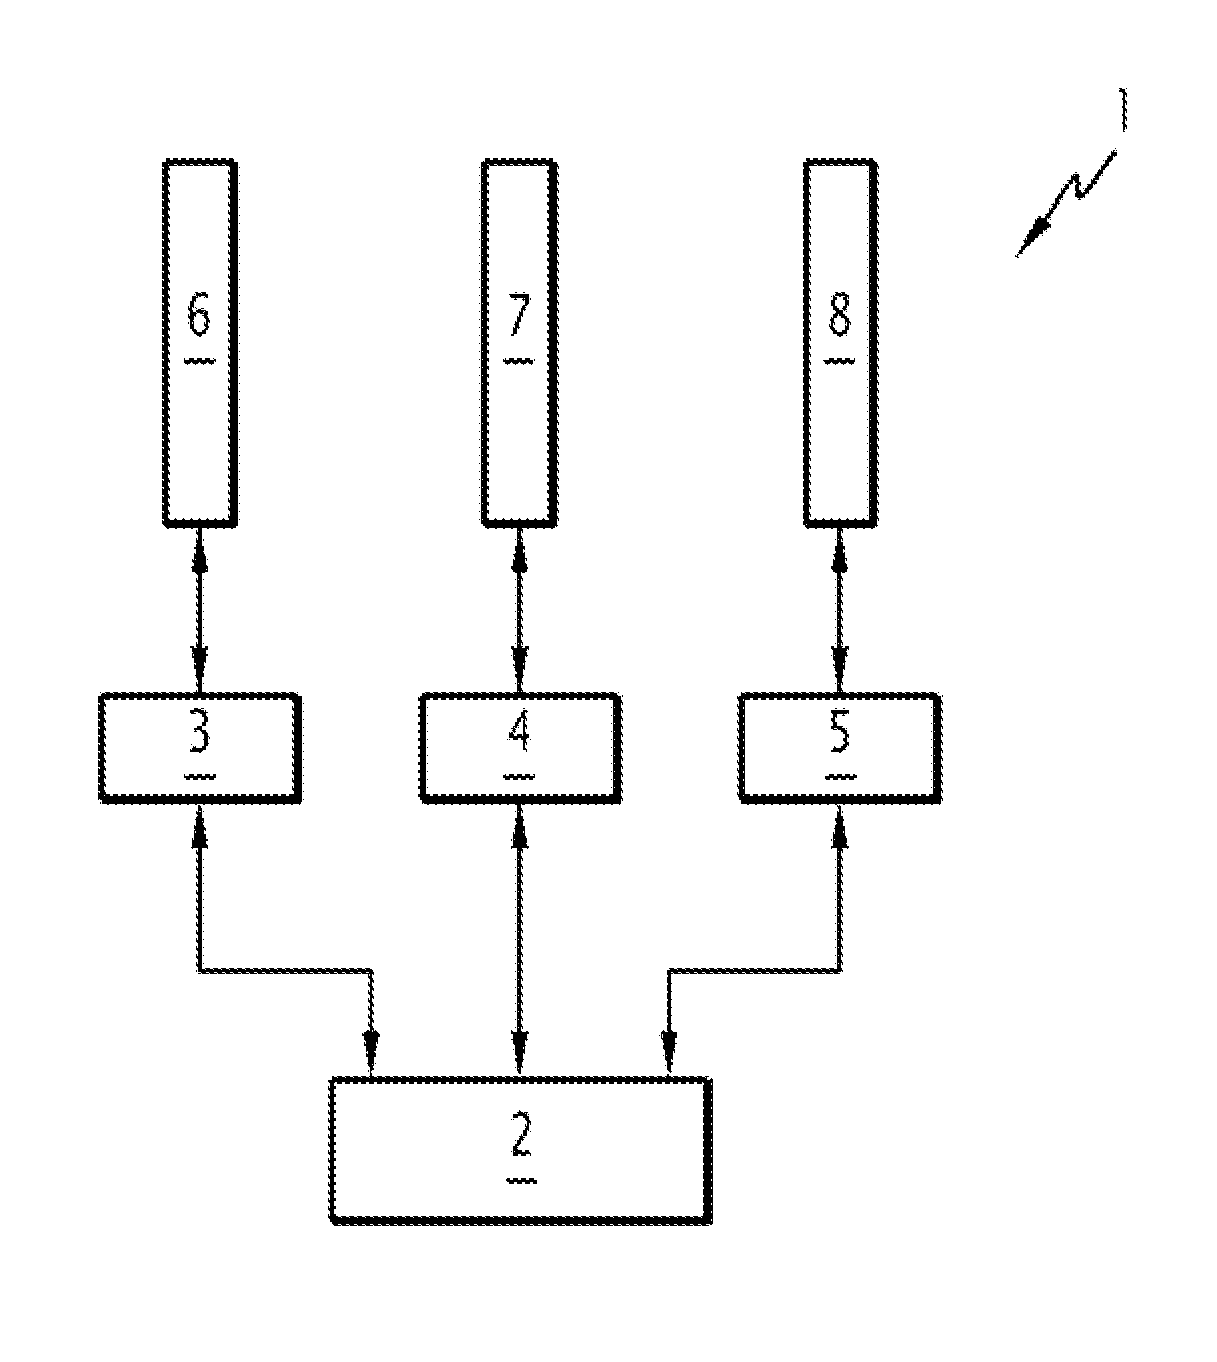 Transceiver Station for Forming a Telecommunications Network Node and Associated Telecommunications Method